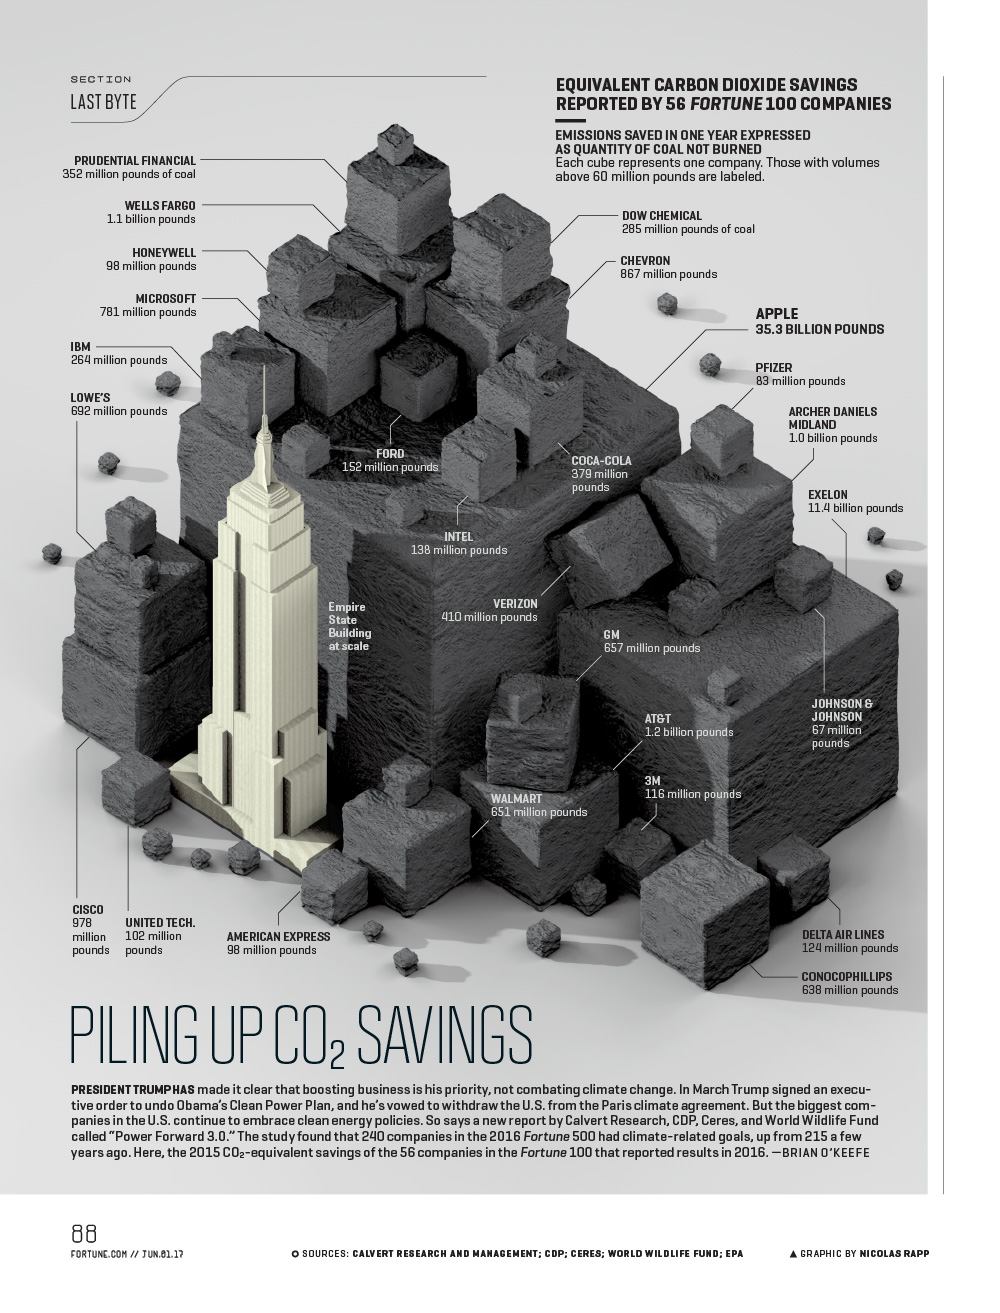 Infographic looks at CO2 savings from Fortune 500 companies